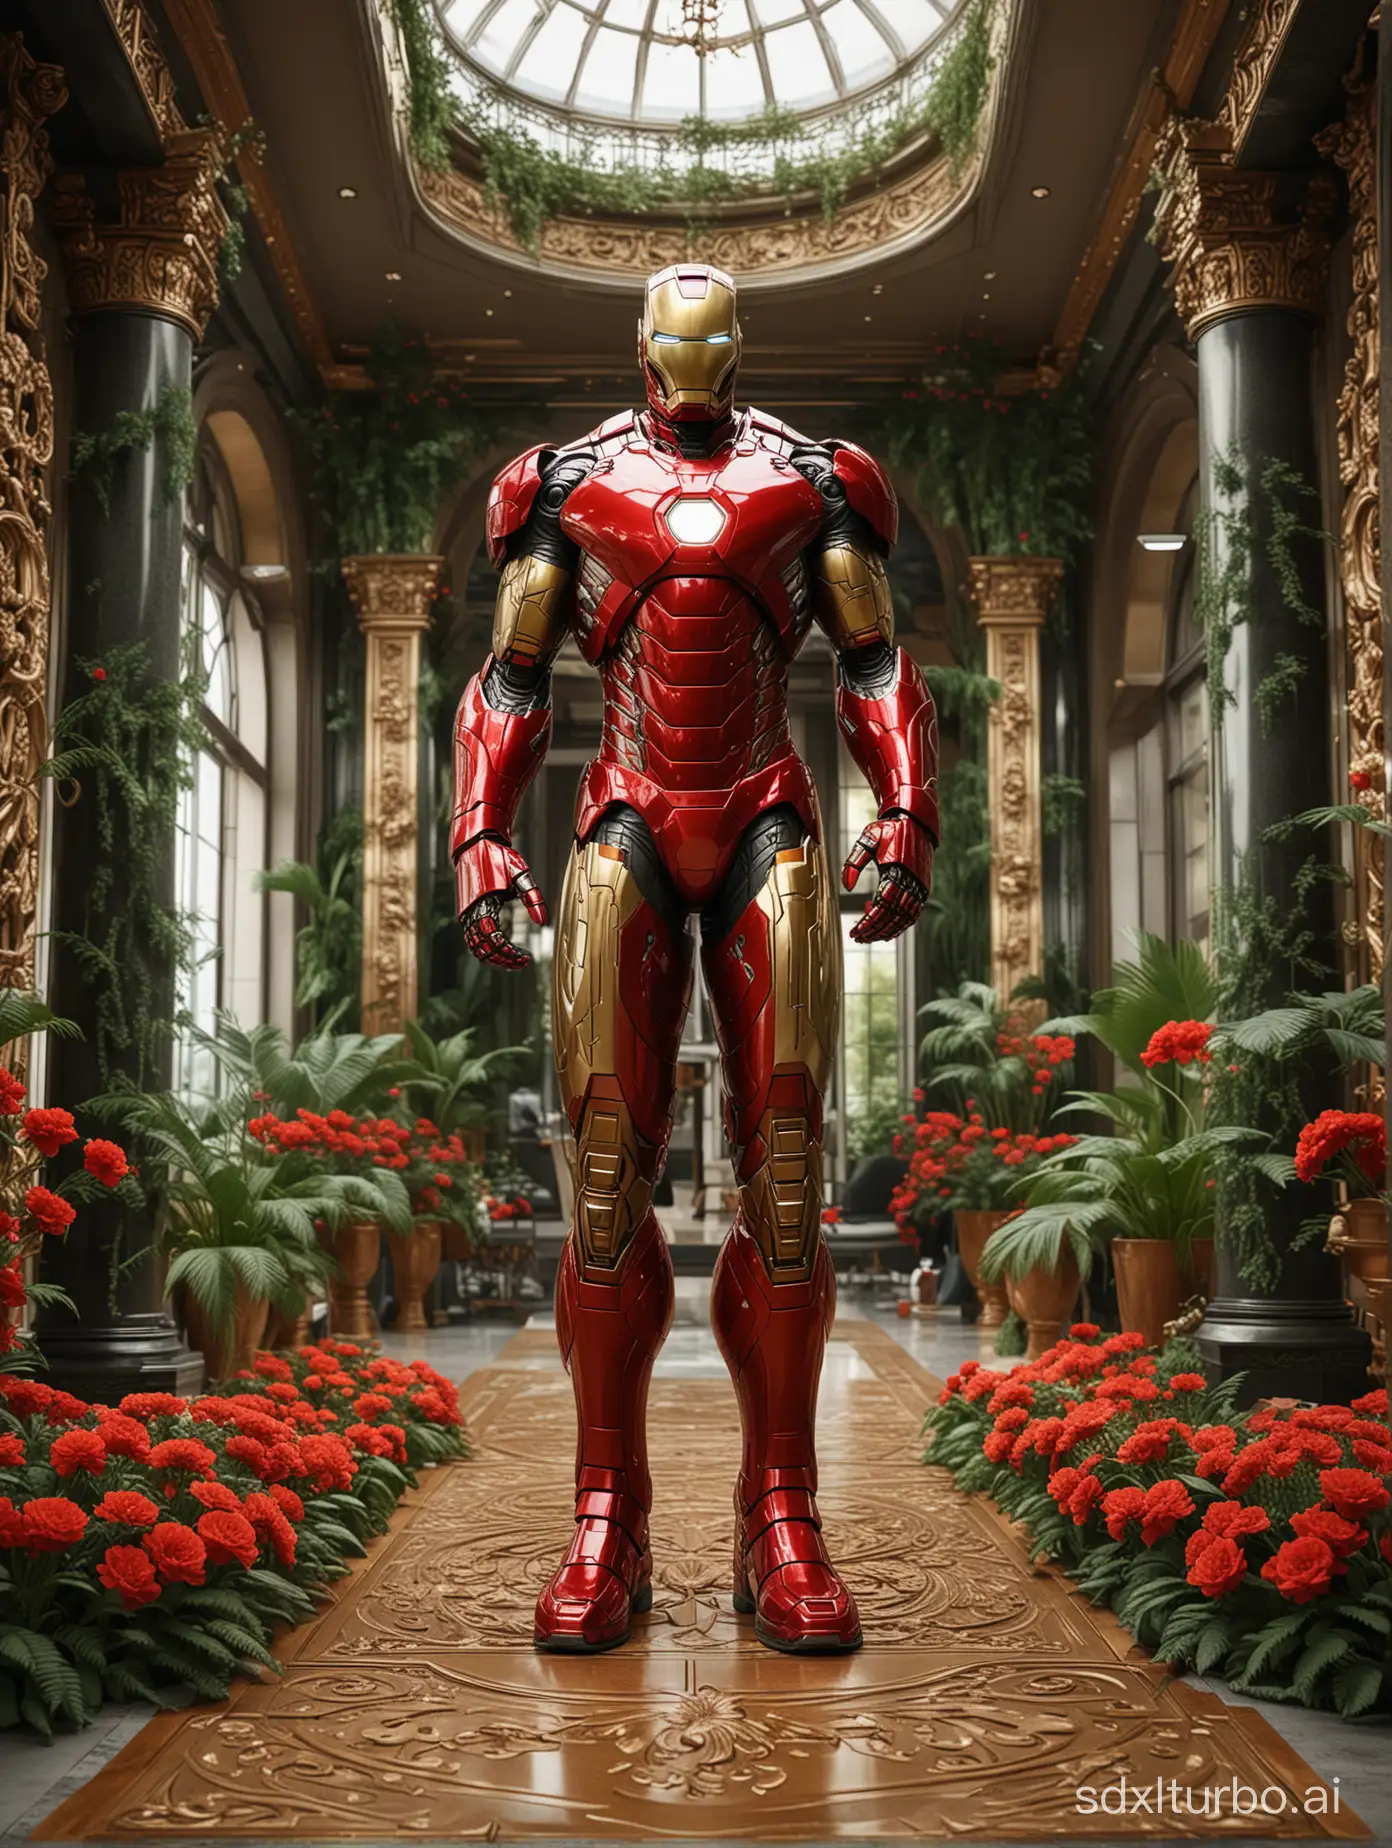 Luxurious-Ironman-Suit-Display-in-Extravagant-Mansion-with-Gold-Accents